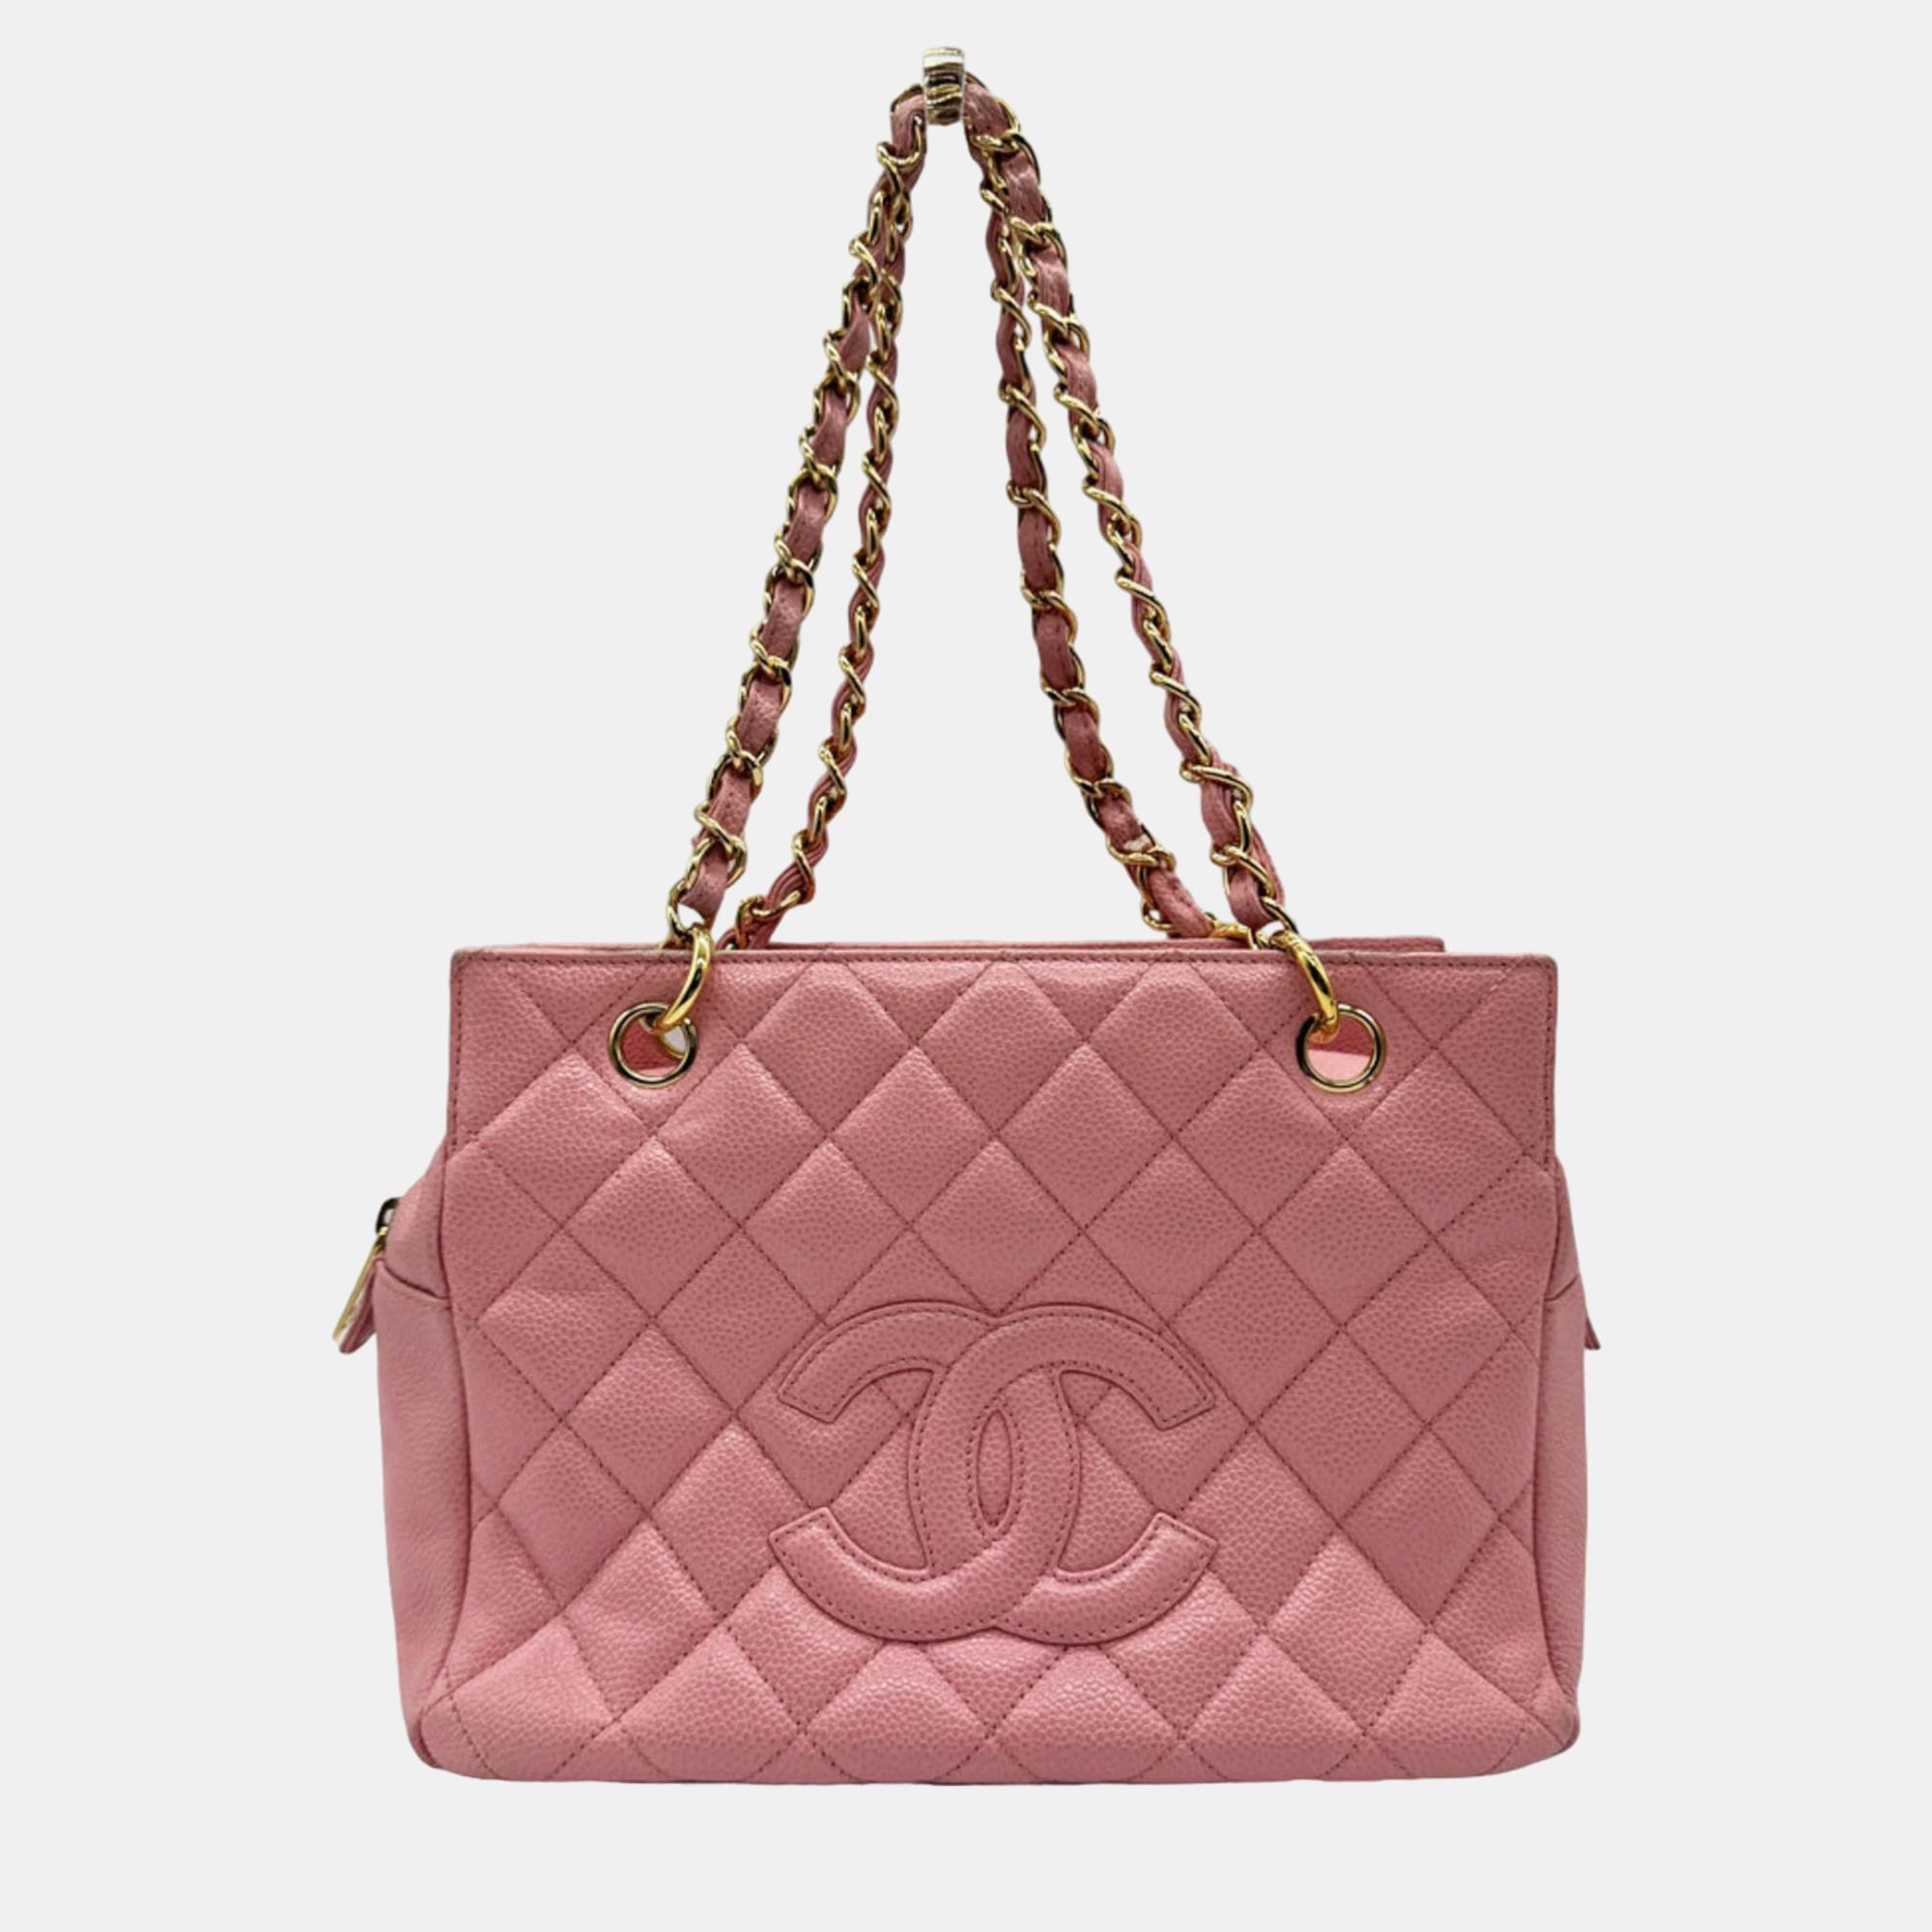 Chanel pink caviar leather  gst tote